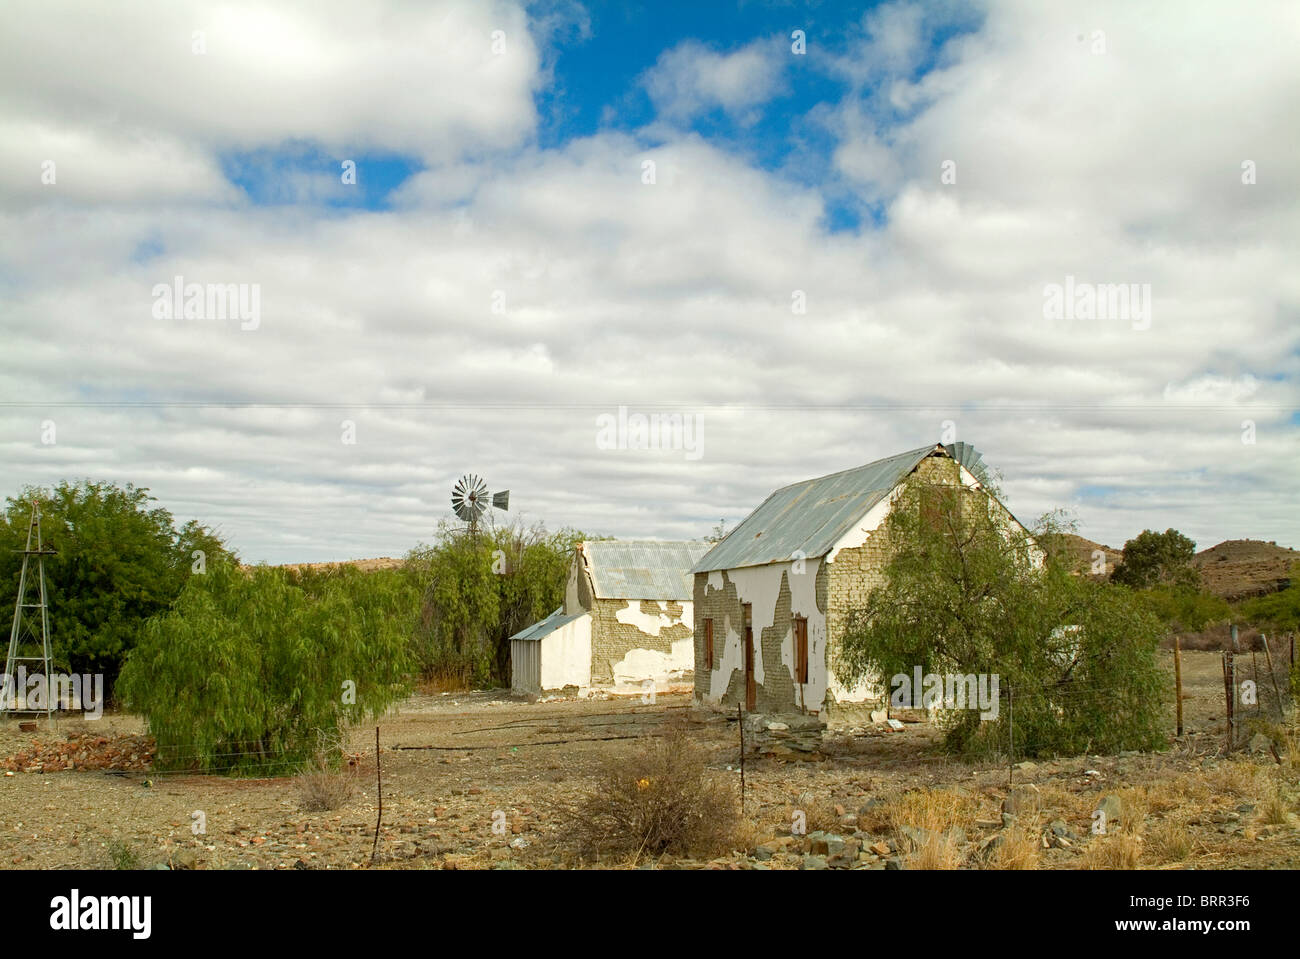 A deserted farmhouse stands crumbling in the Karoo Stock Photo